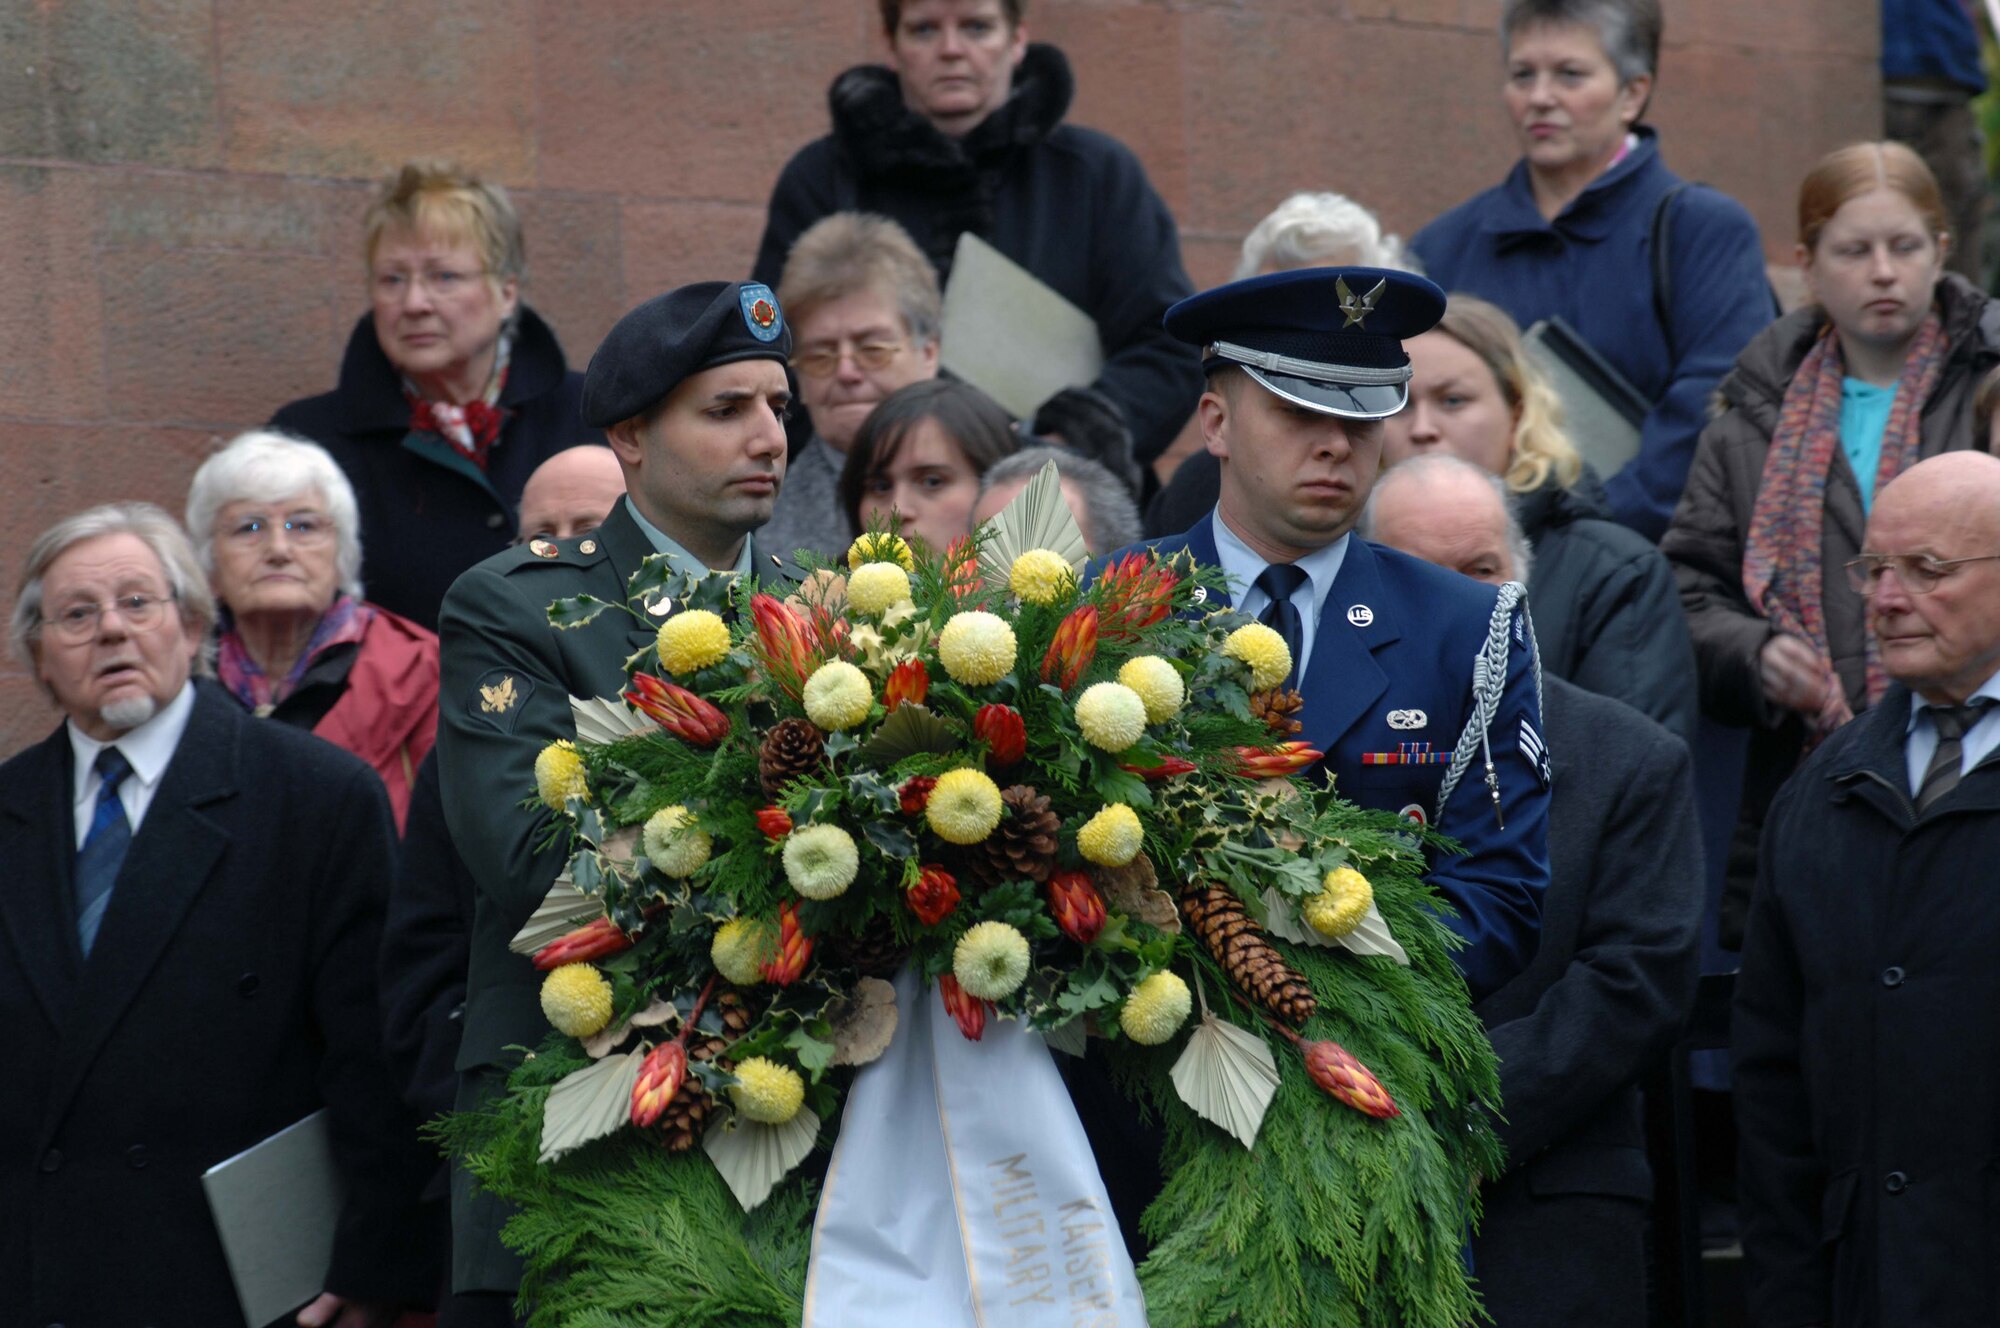 Spc. Vincent Holtzman, from the U.S. Army Garrison Kaiserslautern's Directorate of Human Resources and Senior Airman Brian Lapiska, from the 86th Airlift Wing’s 1st Combat Communications Squadron present the Kaiserslautern military community's wreath during the German National Day of Mourning ceremony Sunday at the Soldiers' Monument in the Kaiserslautern Cemetery. More than 150 people from several different nationalities attended the ceremony. The National Day of Mourning or Volkstrauertag is a public holiday in Germany that is observed two Sundays before the first Advent - the Sunday that is in the period from Nov. 13 to 19. This German holiday is similar to the United States' "Veteran's Day," except that it commemorates all victims who died during wars. It was first observed in Germany in 1952. The city of Kaiserslautern and the German Association of War Graves have held the Volkstrauertag wreath-laying ceremony at the Soldiers’ Monument in the Kaiserslautern Cemetery for 25 years. The ceremony usually consists of about 10 wreath presentations, one of which is from the Kaiserslautern military community where an Airman and Soldier will present the wreath and alongside an Air Force and Army officers will render a salute. The U.S. Army Garrison Kaiserslautern has participated in this ceremony since it was established in 1992. With two eternal flames, the Soldiers’ Monument watches over military graves from World War I and World War II. U.S. Army photo by Christine June, USAG Kaiserslautern.